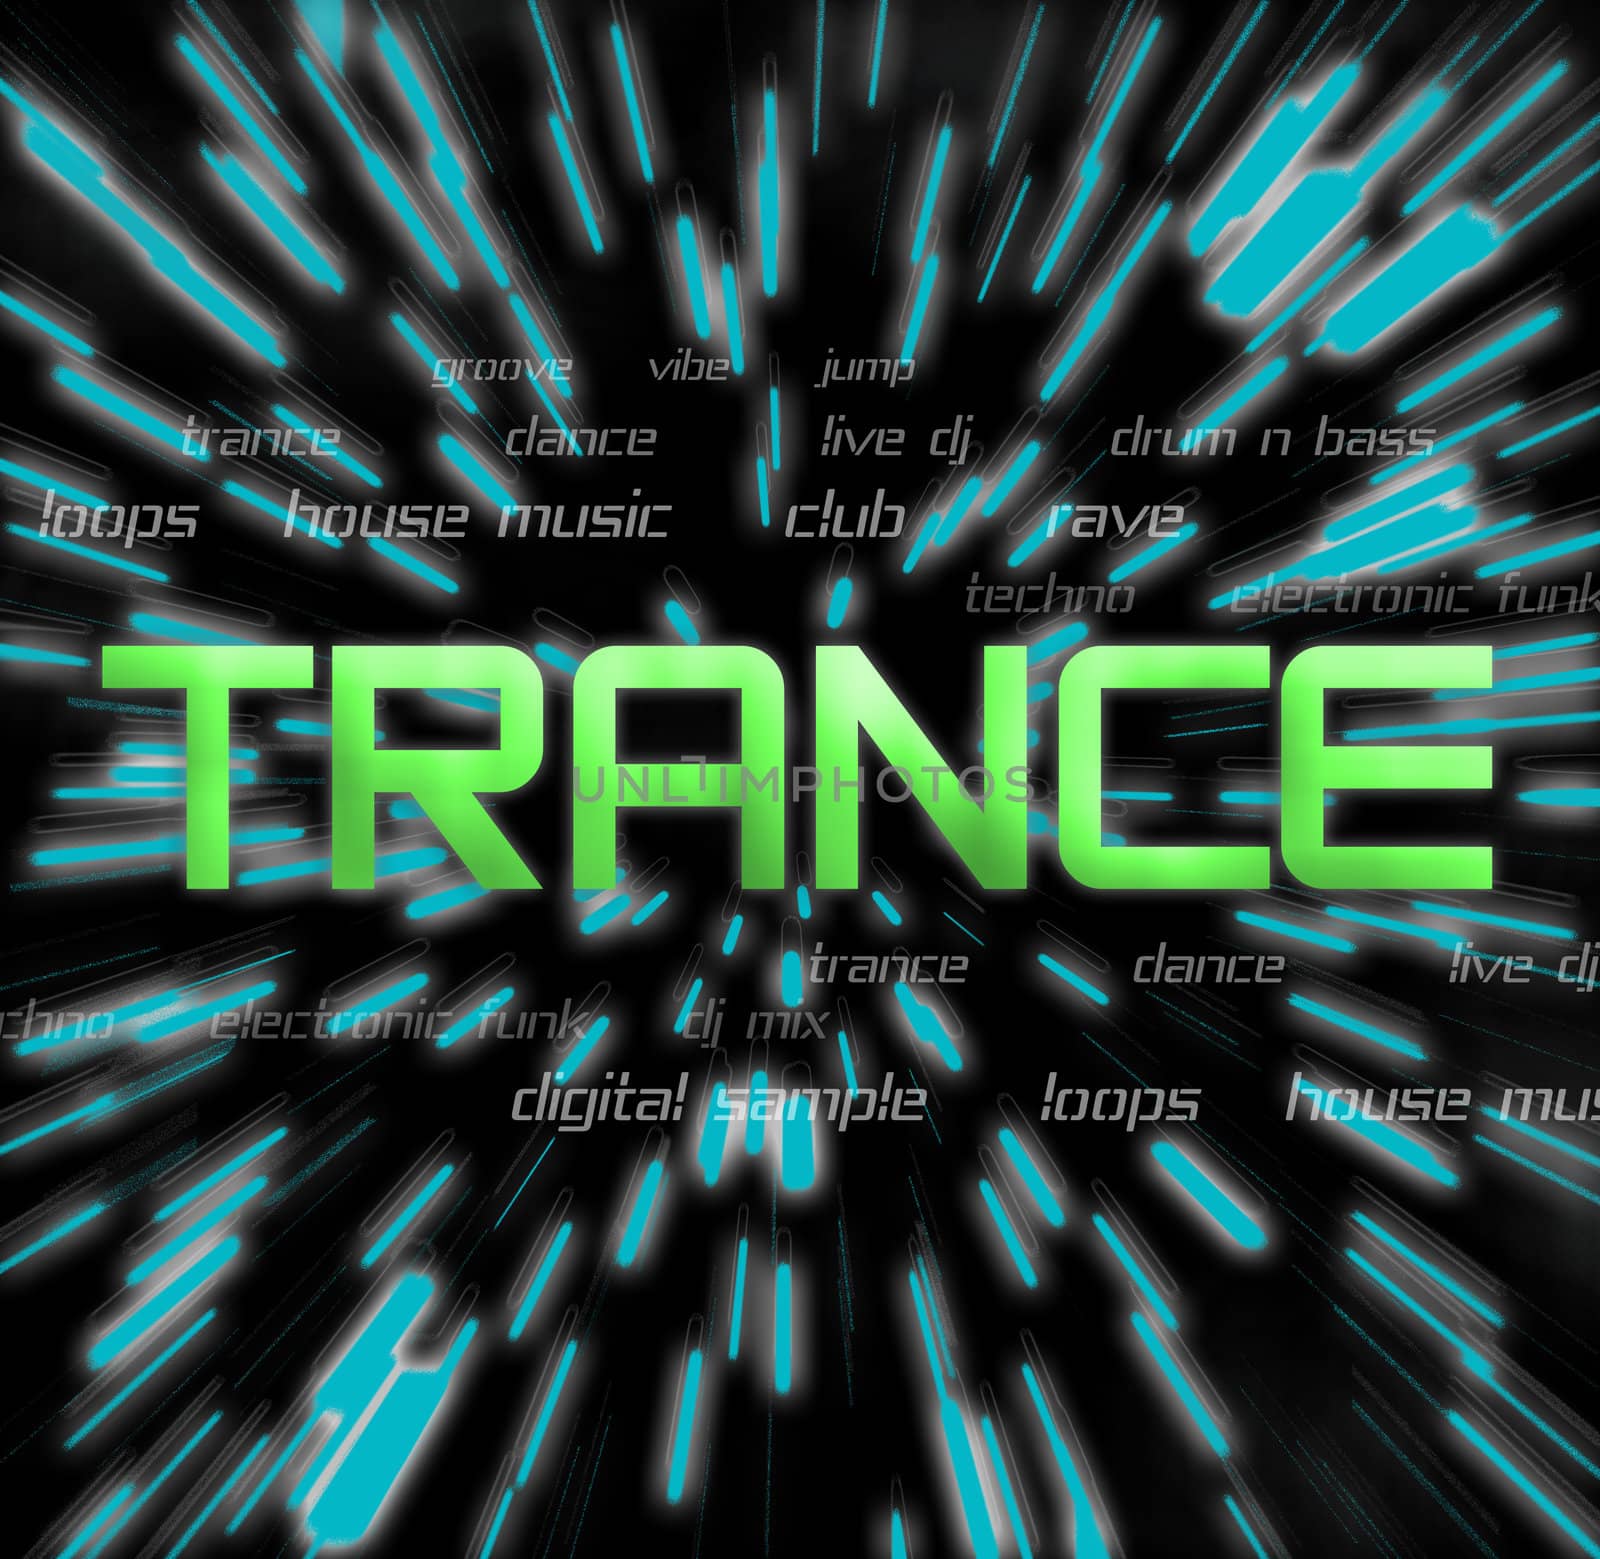 A montage themed around trance music.